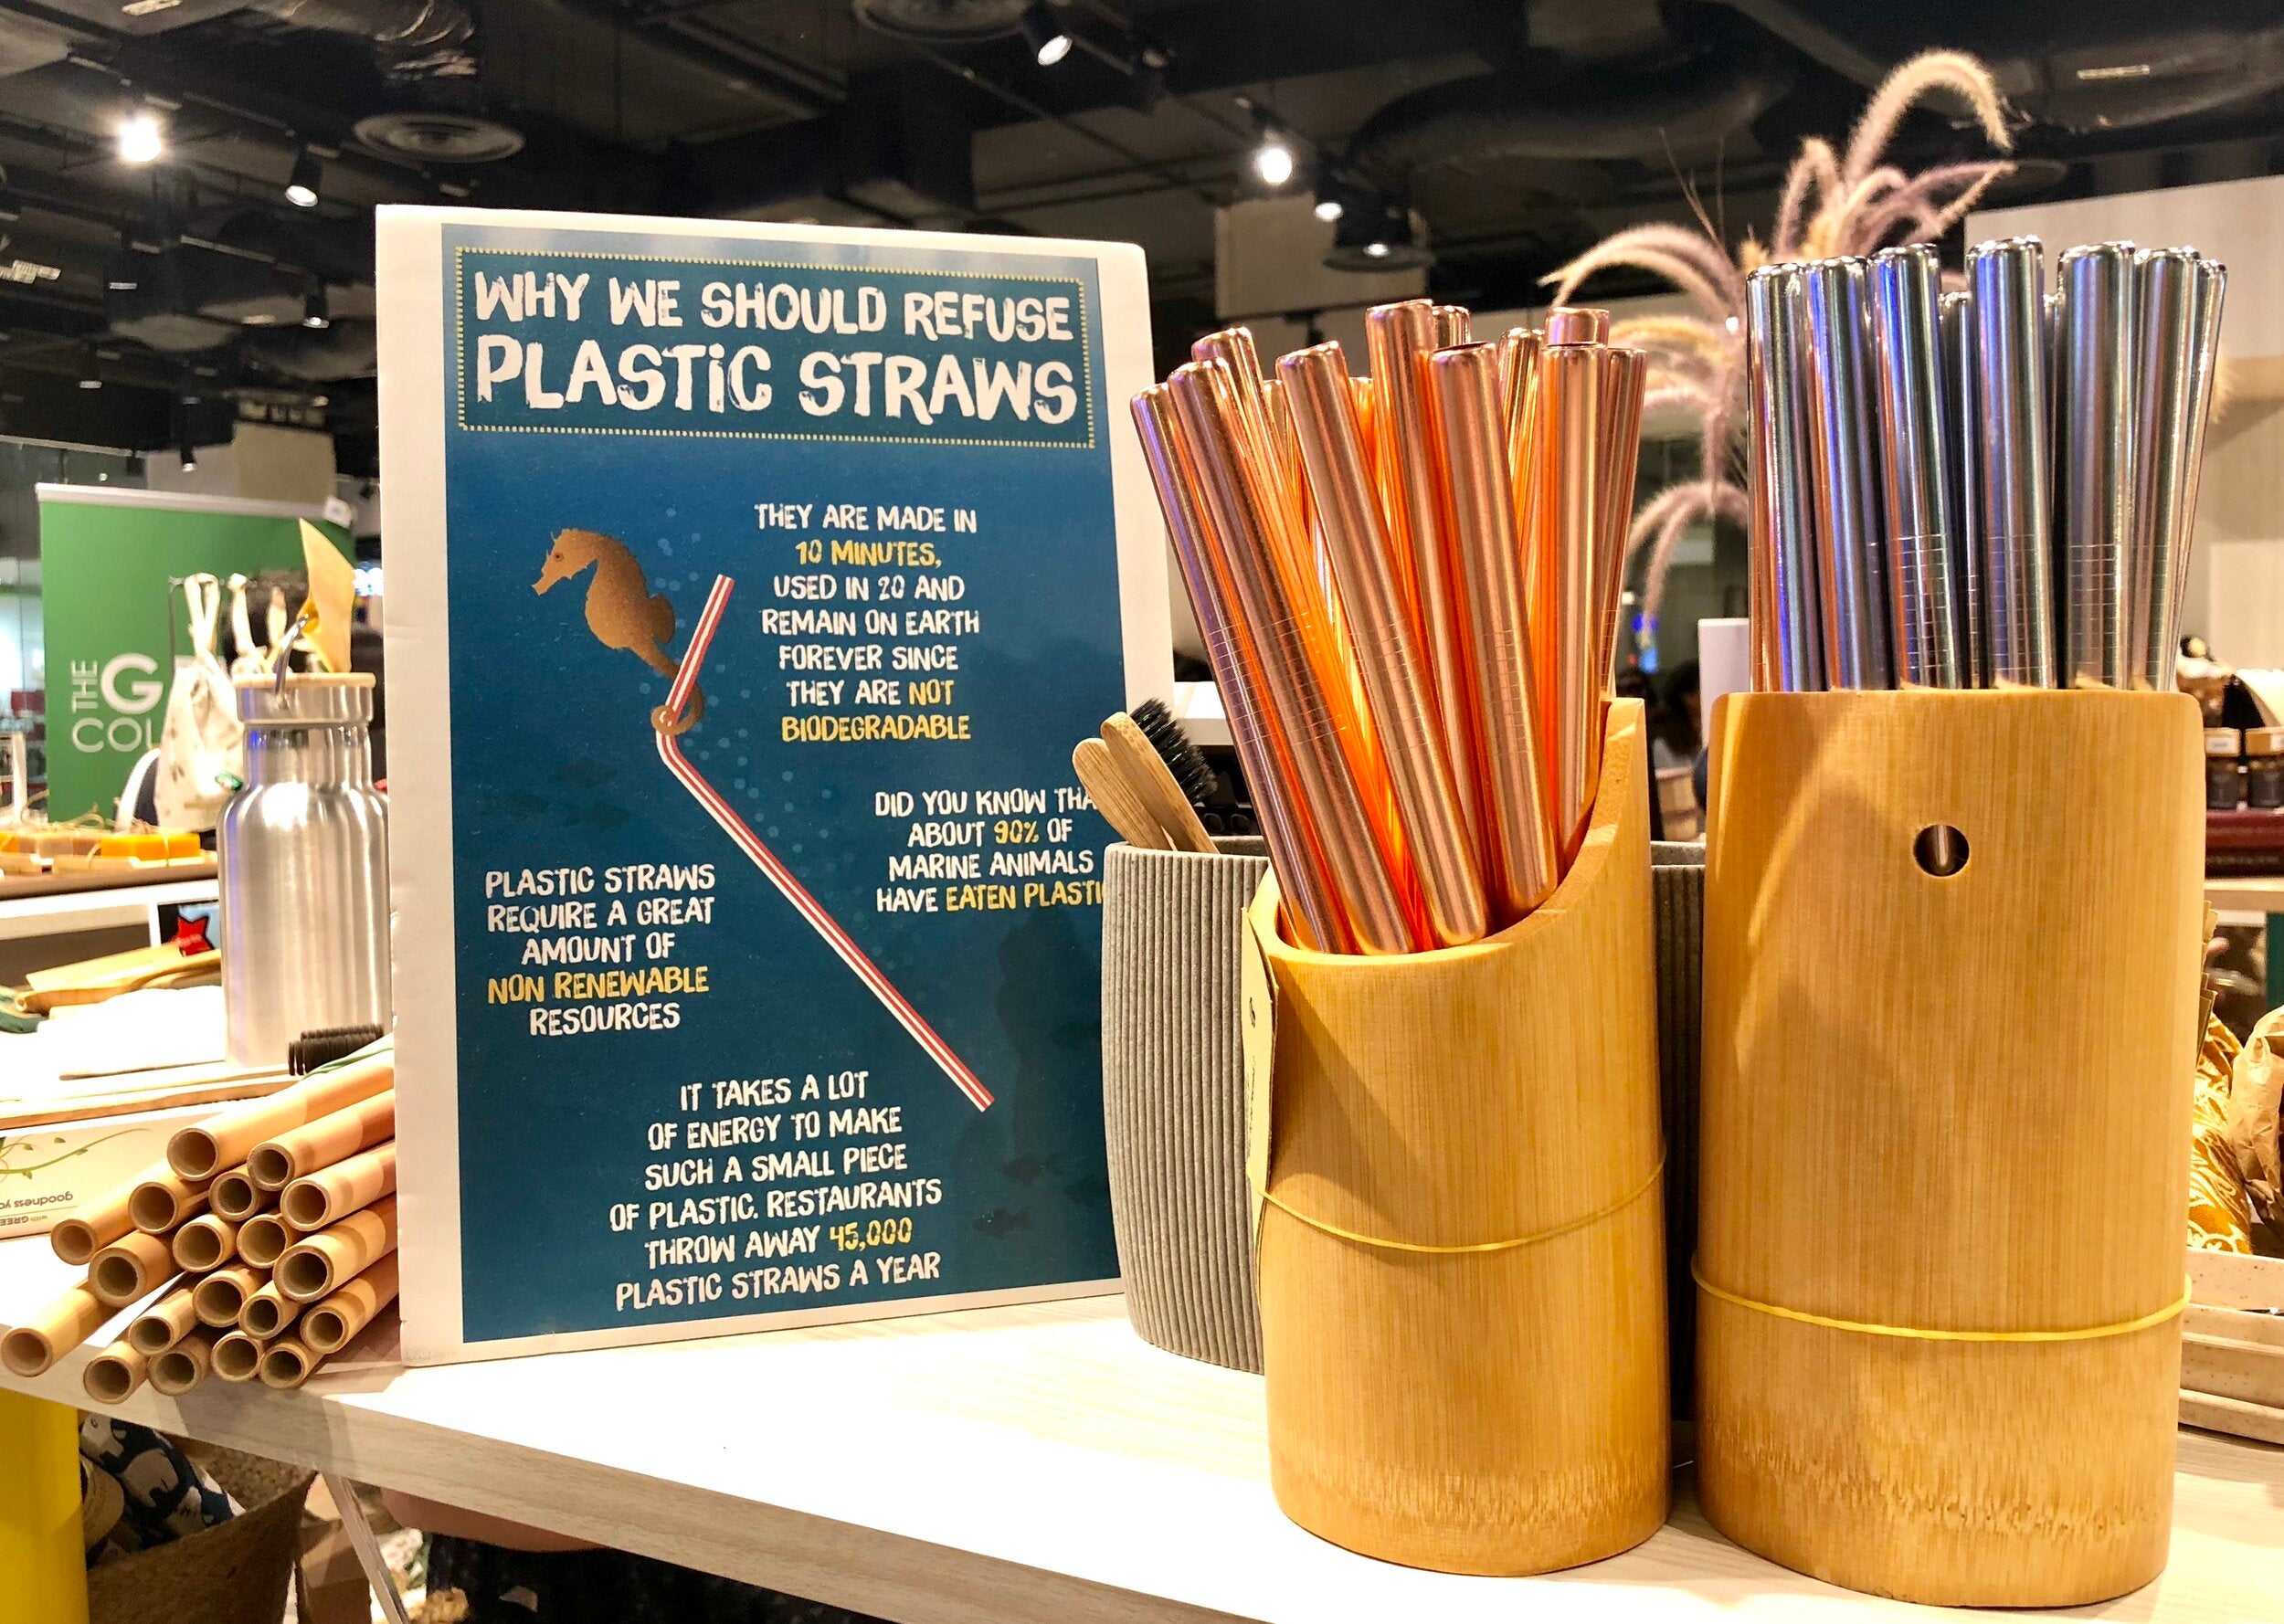 7 Ways to Care for Your Reusable Straws